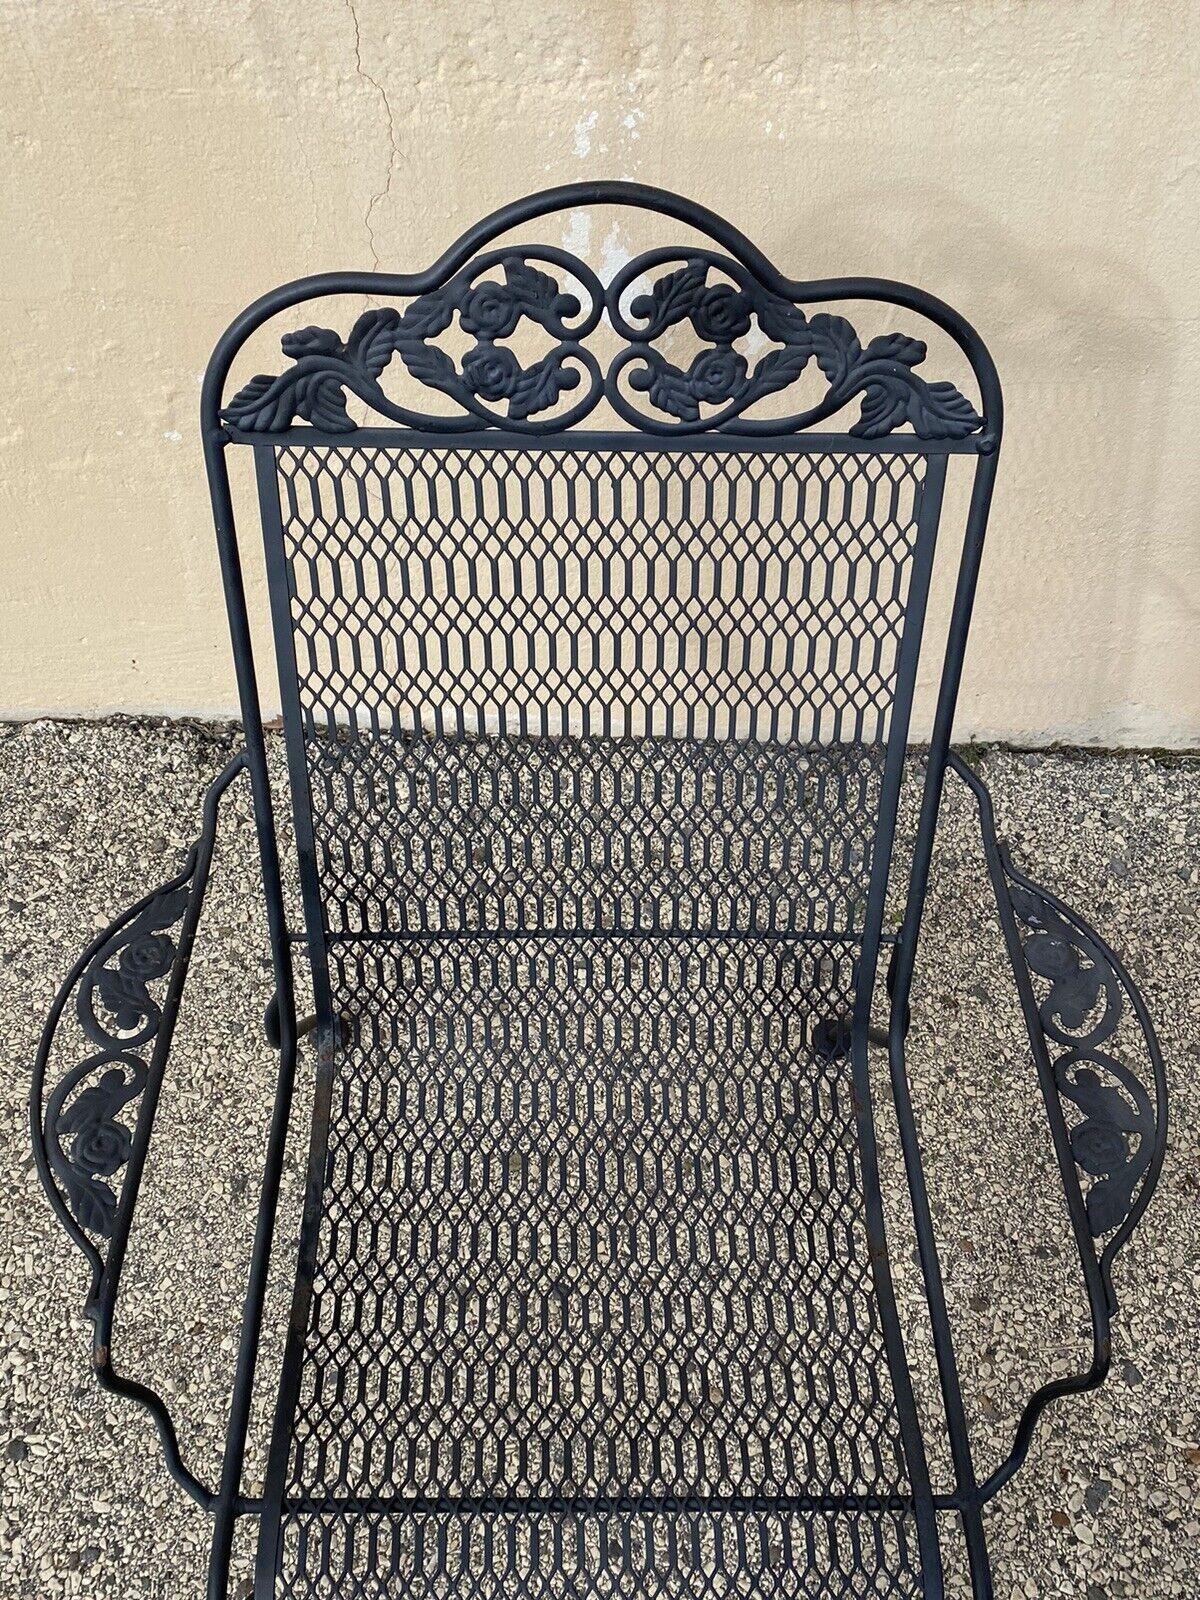 Vintage Wrought Iron Rose and Vine Pattern Garden Patio Chairs - 7 Pc Set For Sale 4